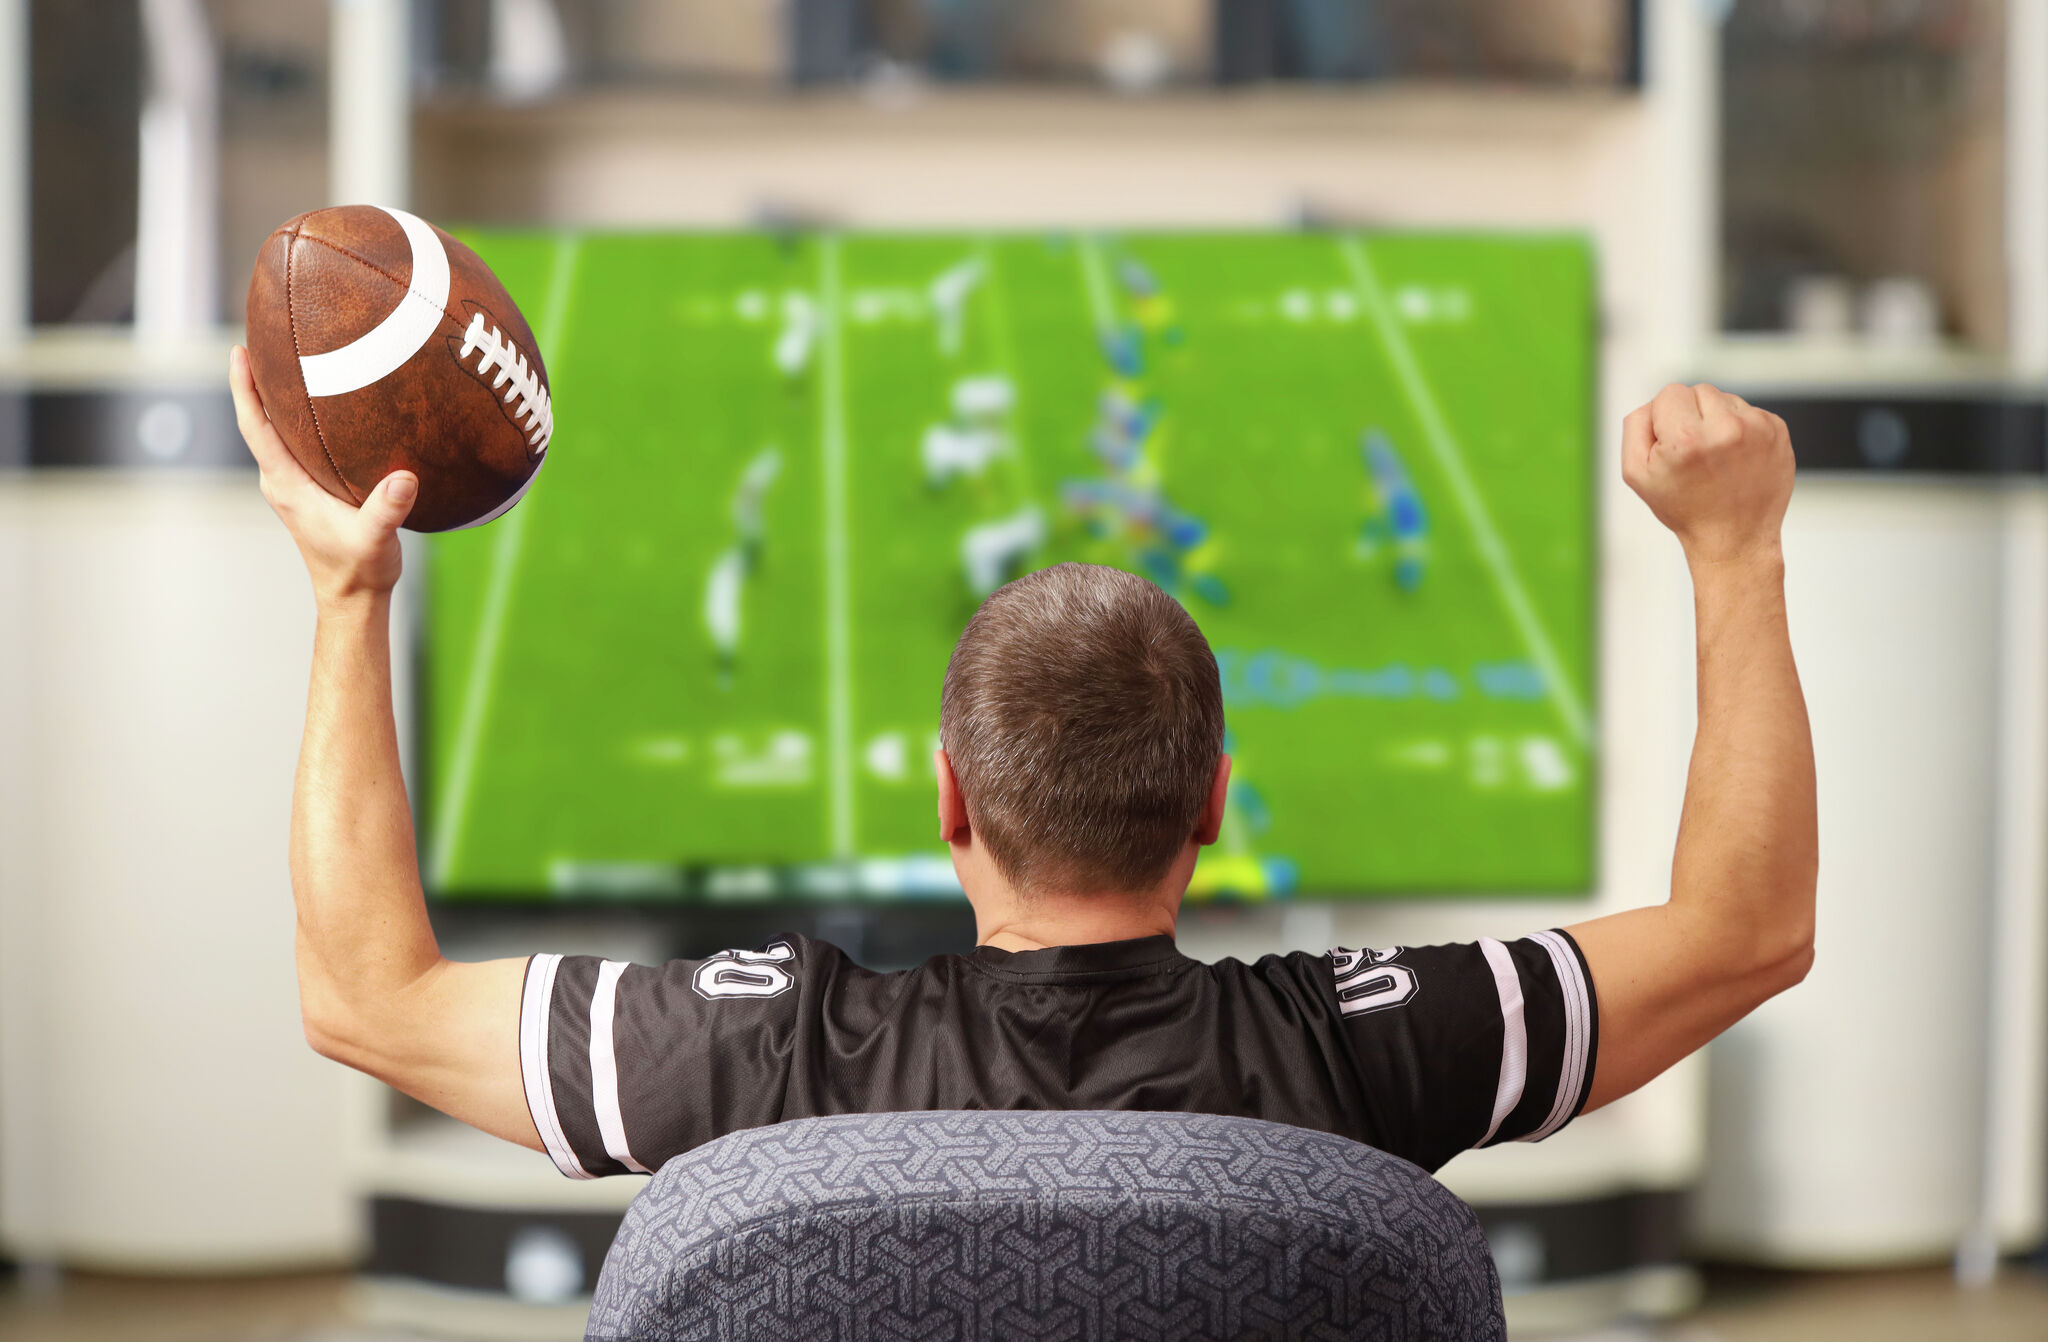 watch nfl games on tv today